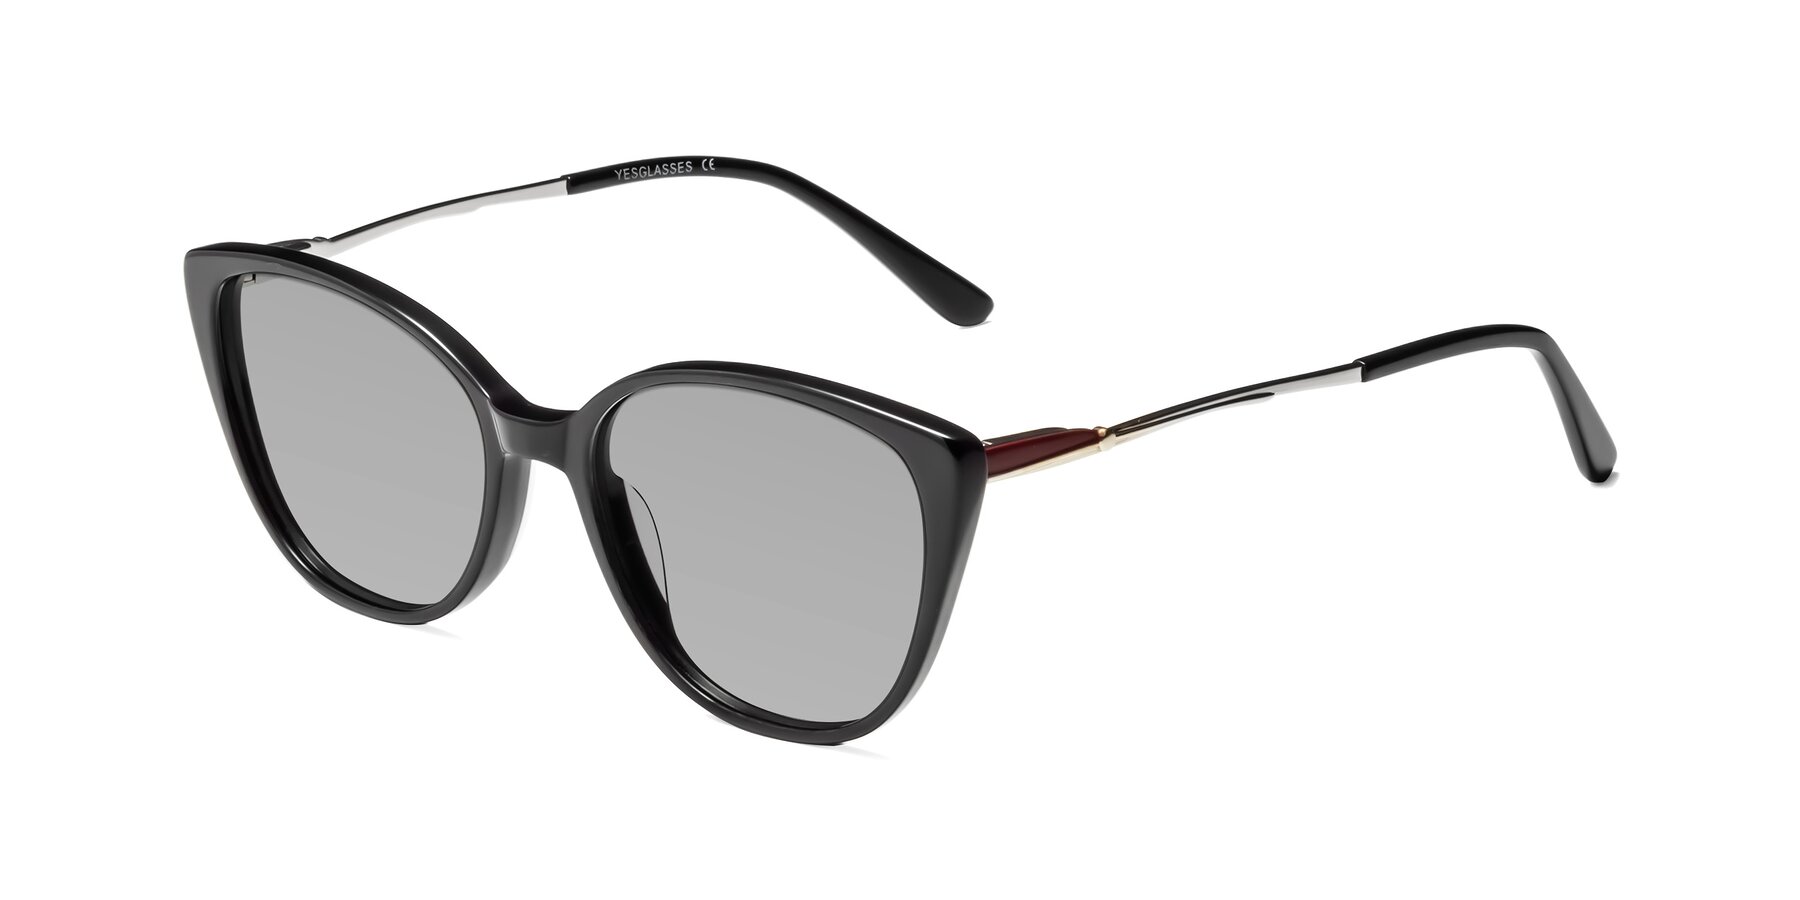 Angle of 17424 in Black with Light Gray Tinted Lenses